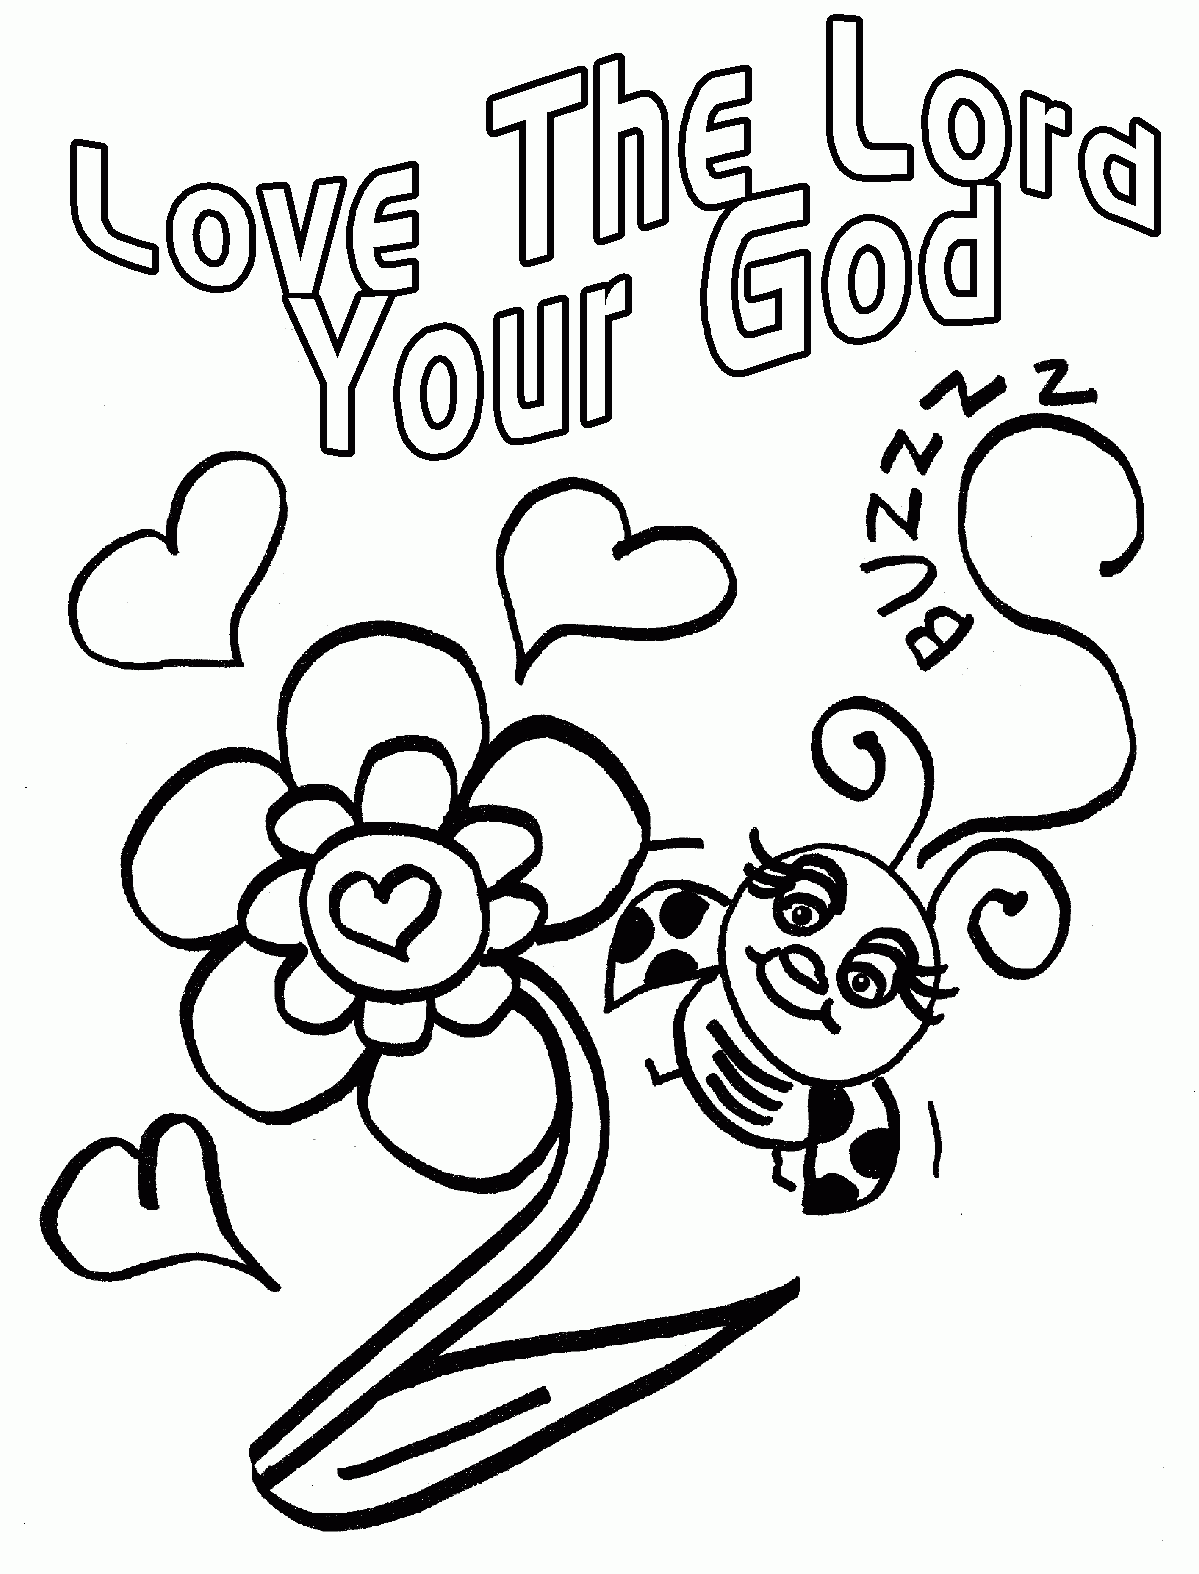 Childrens Gems In My Treasure Box: Love Bug For Jesus Coloring Pages